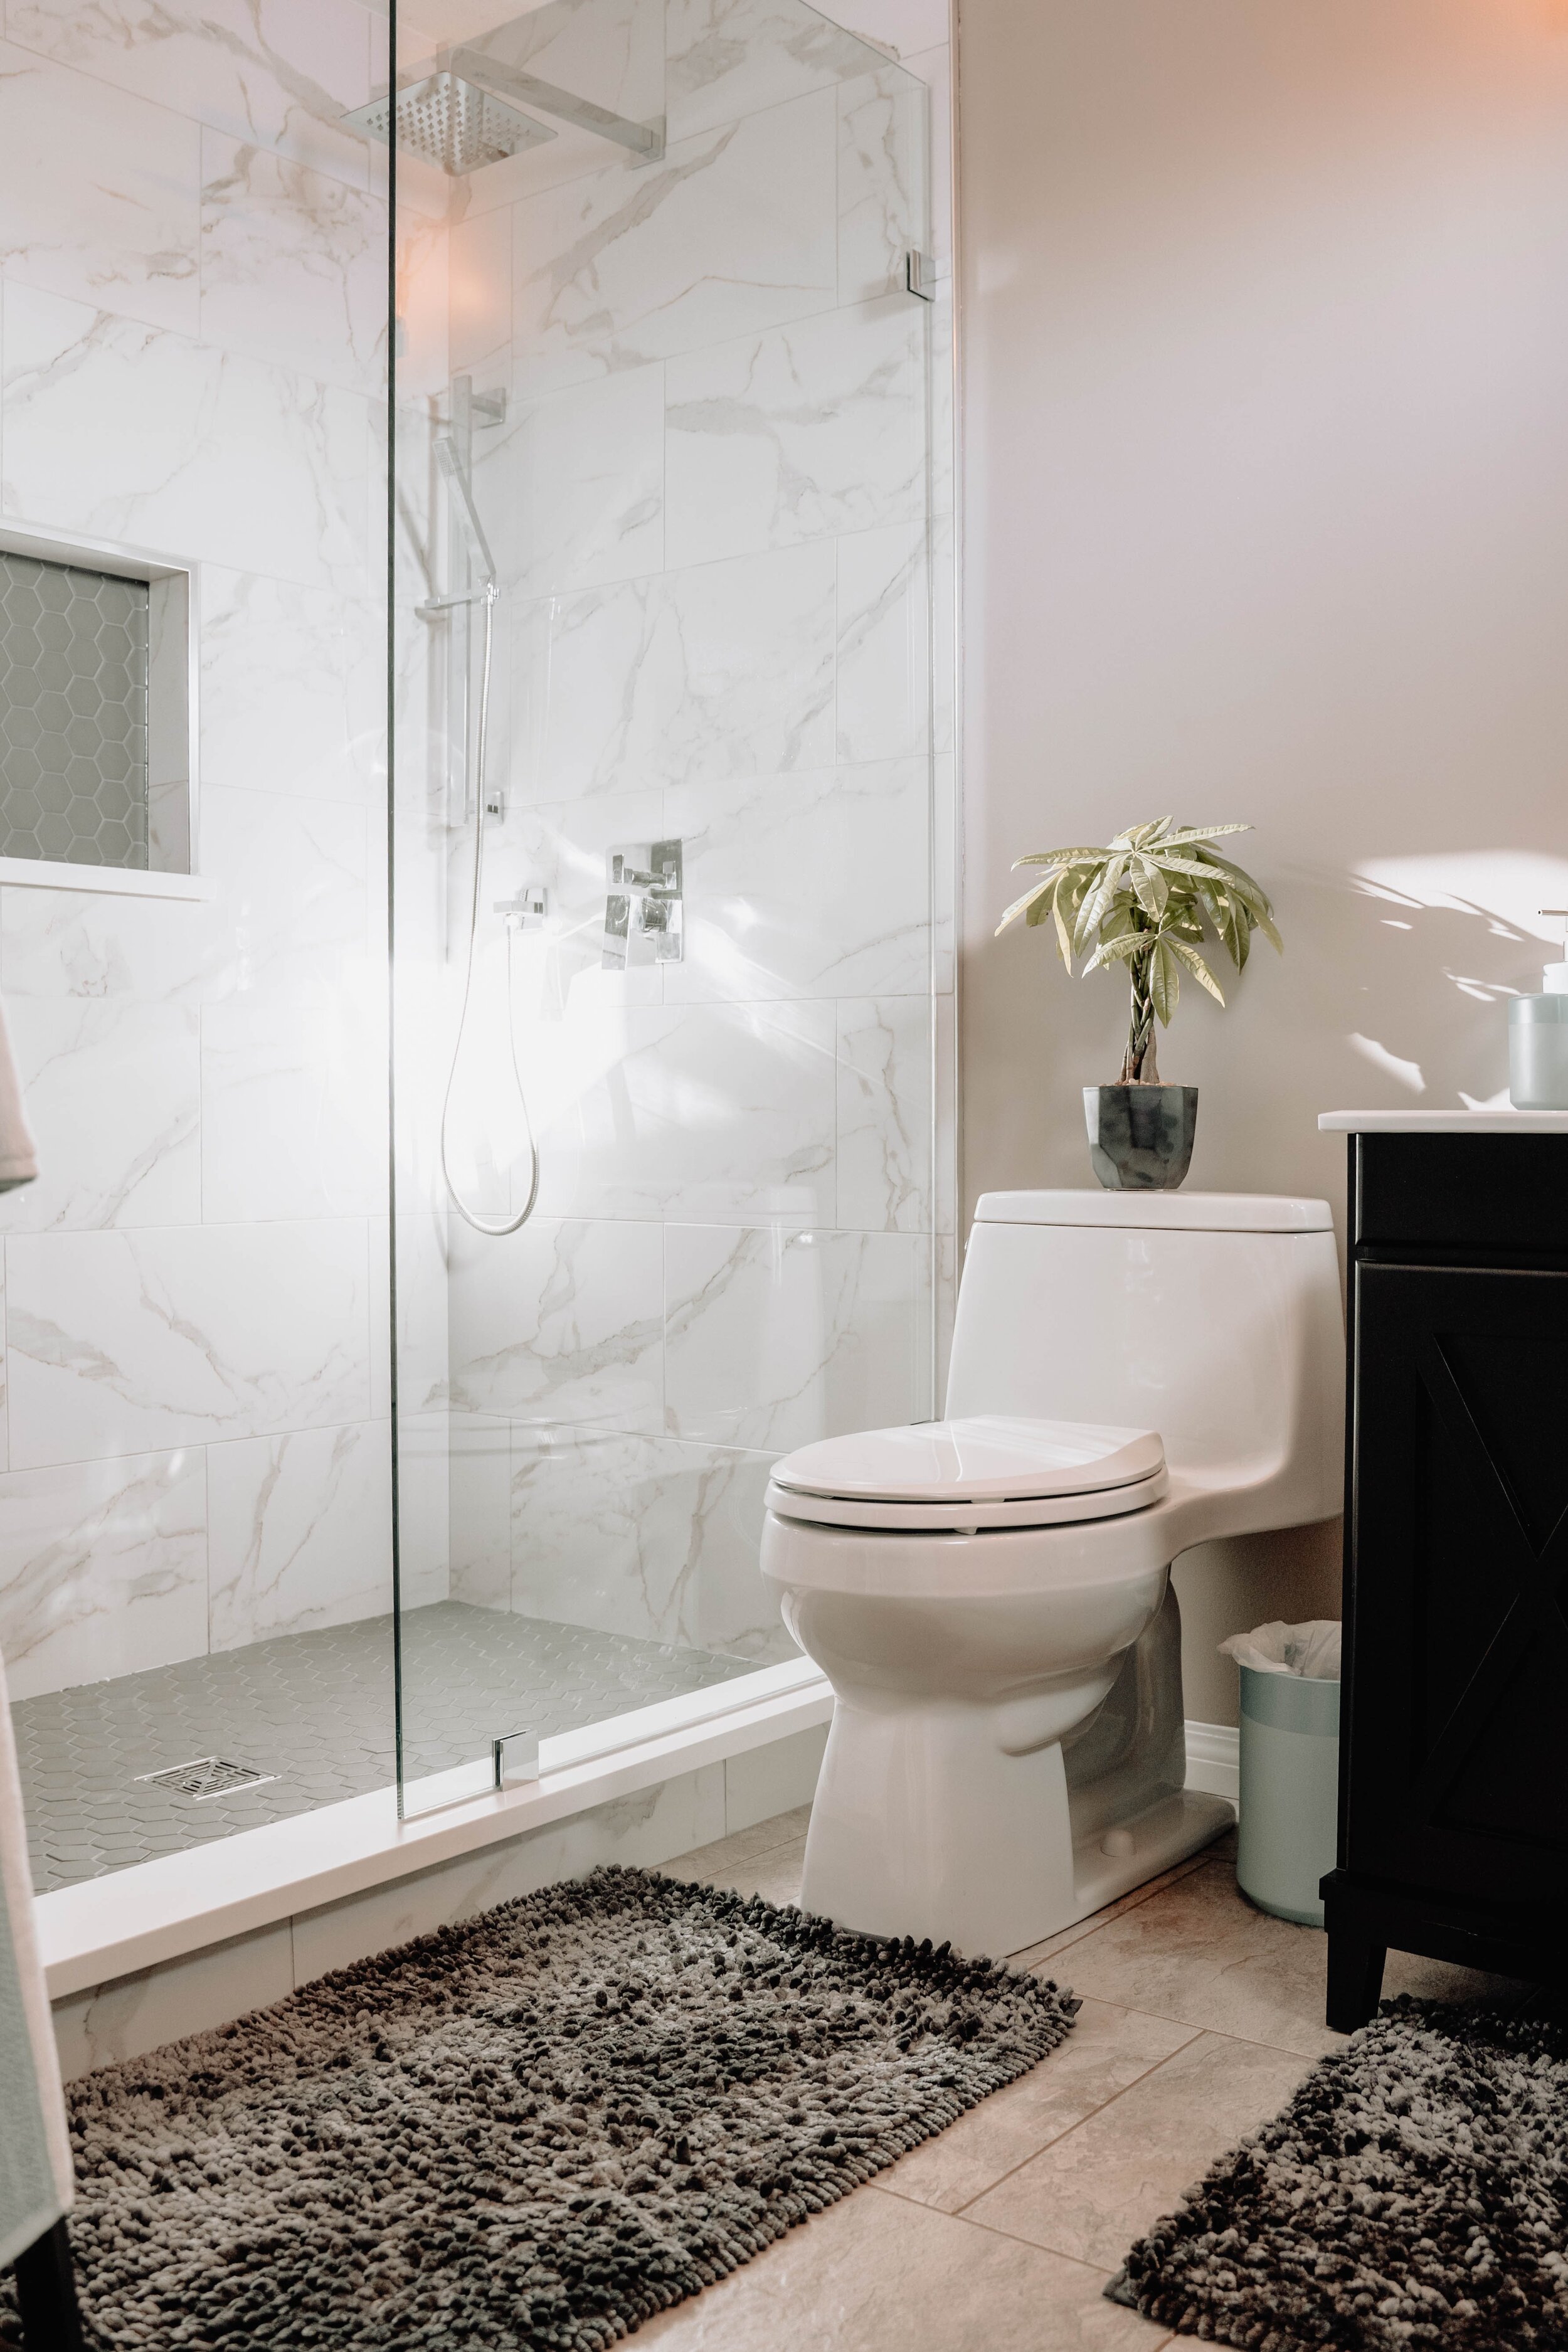  Dirtiest Spots in your bathroom. ways to make your bathroom cleaner, knowing the most contaminated bathroom area and what are the best cleaning tools or cleaning agents to use to decrase the microorganism development. Call Vivian's Maid in seattle c